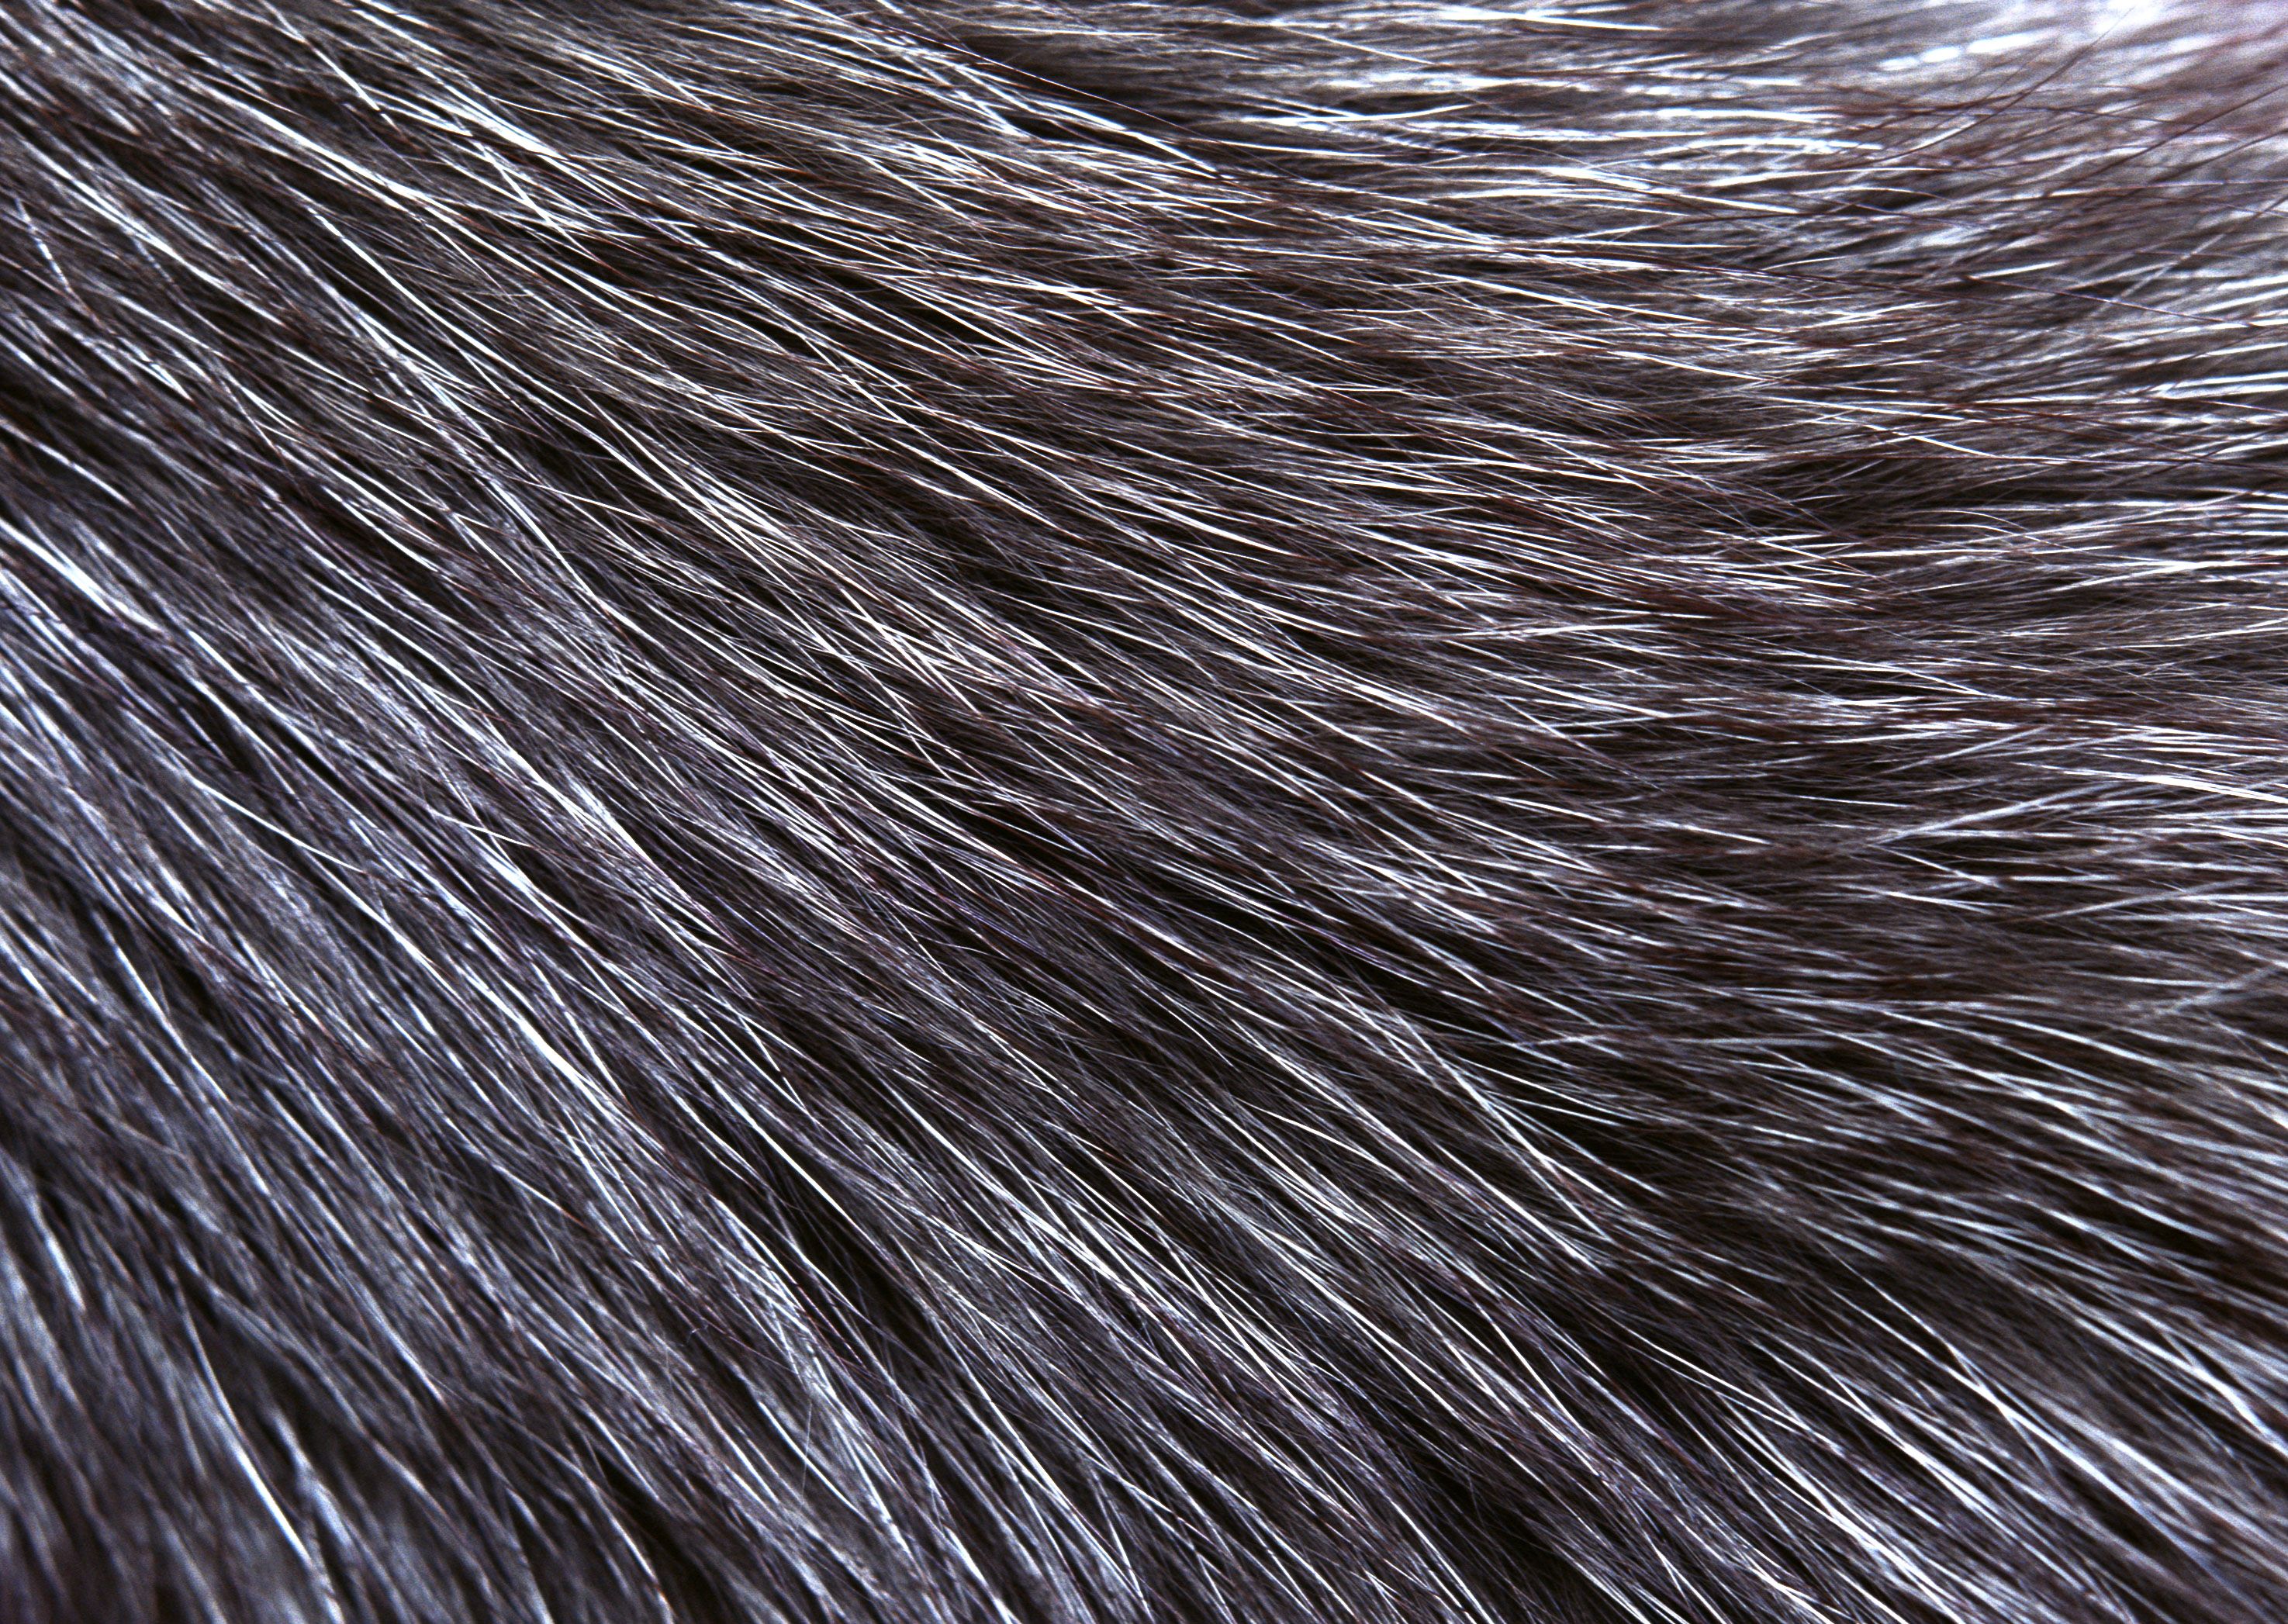 Animal skins, textures, leather, wool, download photo, background